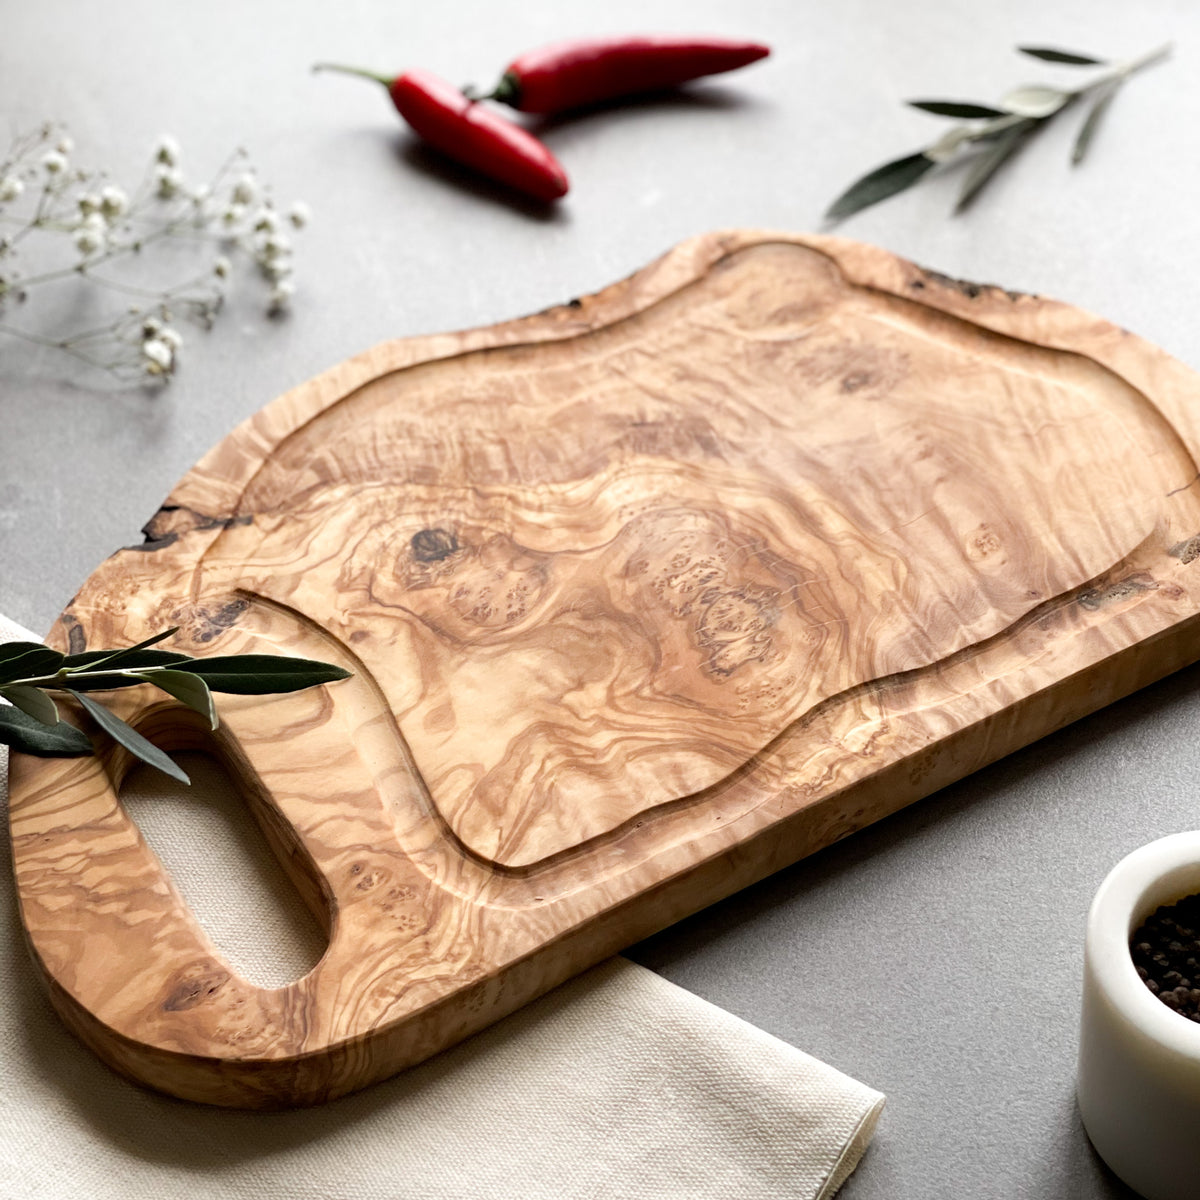 Olive Wood Handled Chopping Board With Jus Groove The Rustic Dish Ltd® 